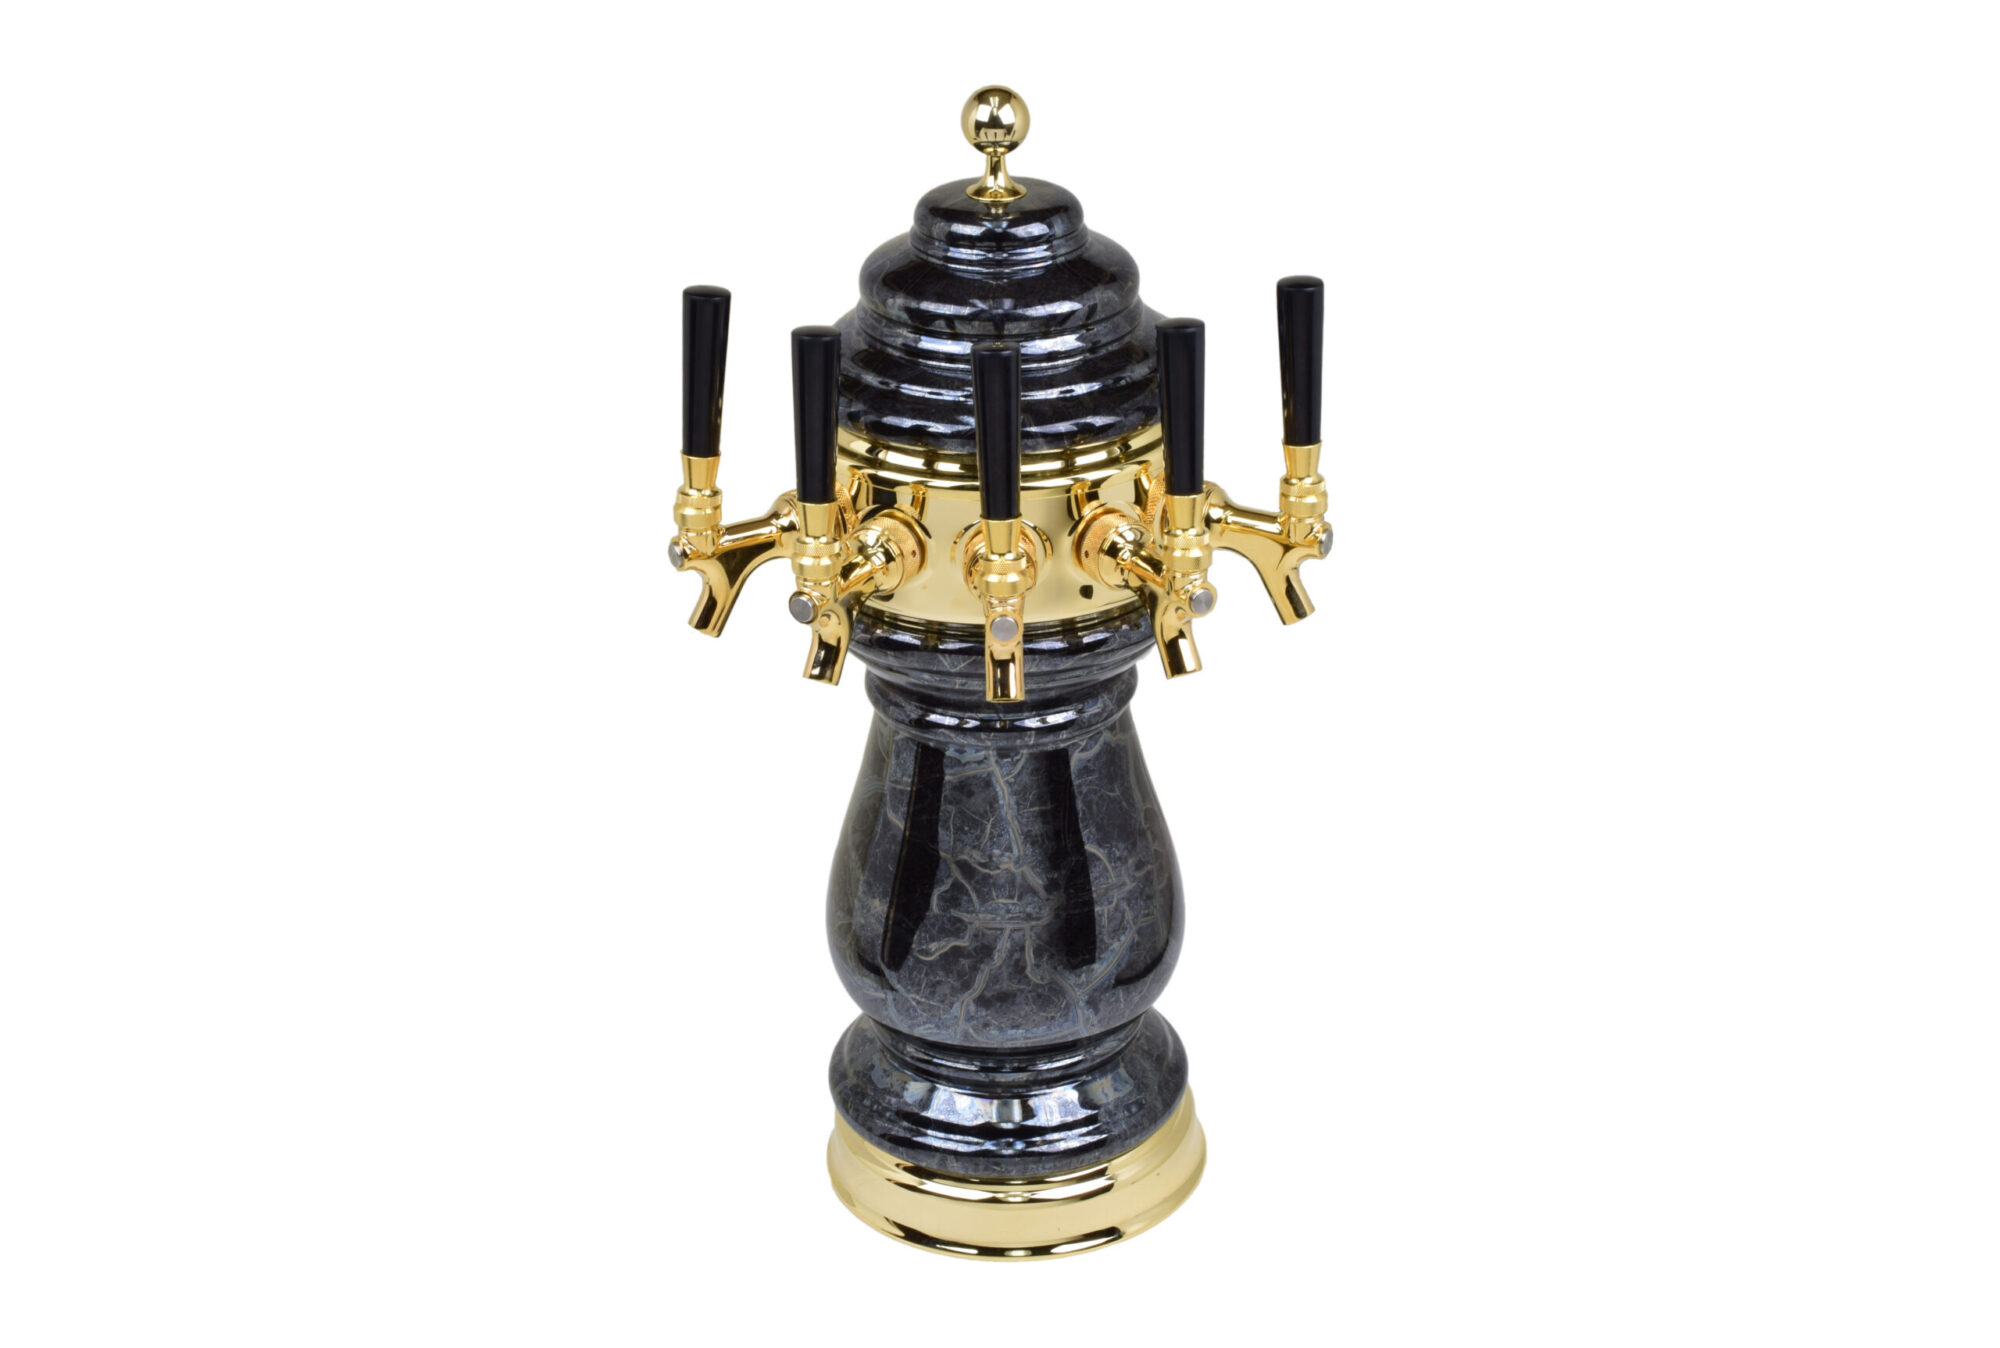 882B-5BM -- Five Faucet Ceramic Tower with PVD Brass Hardware - Available in 5 Colors - Shown in Black Marble